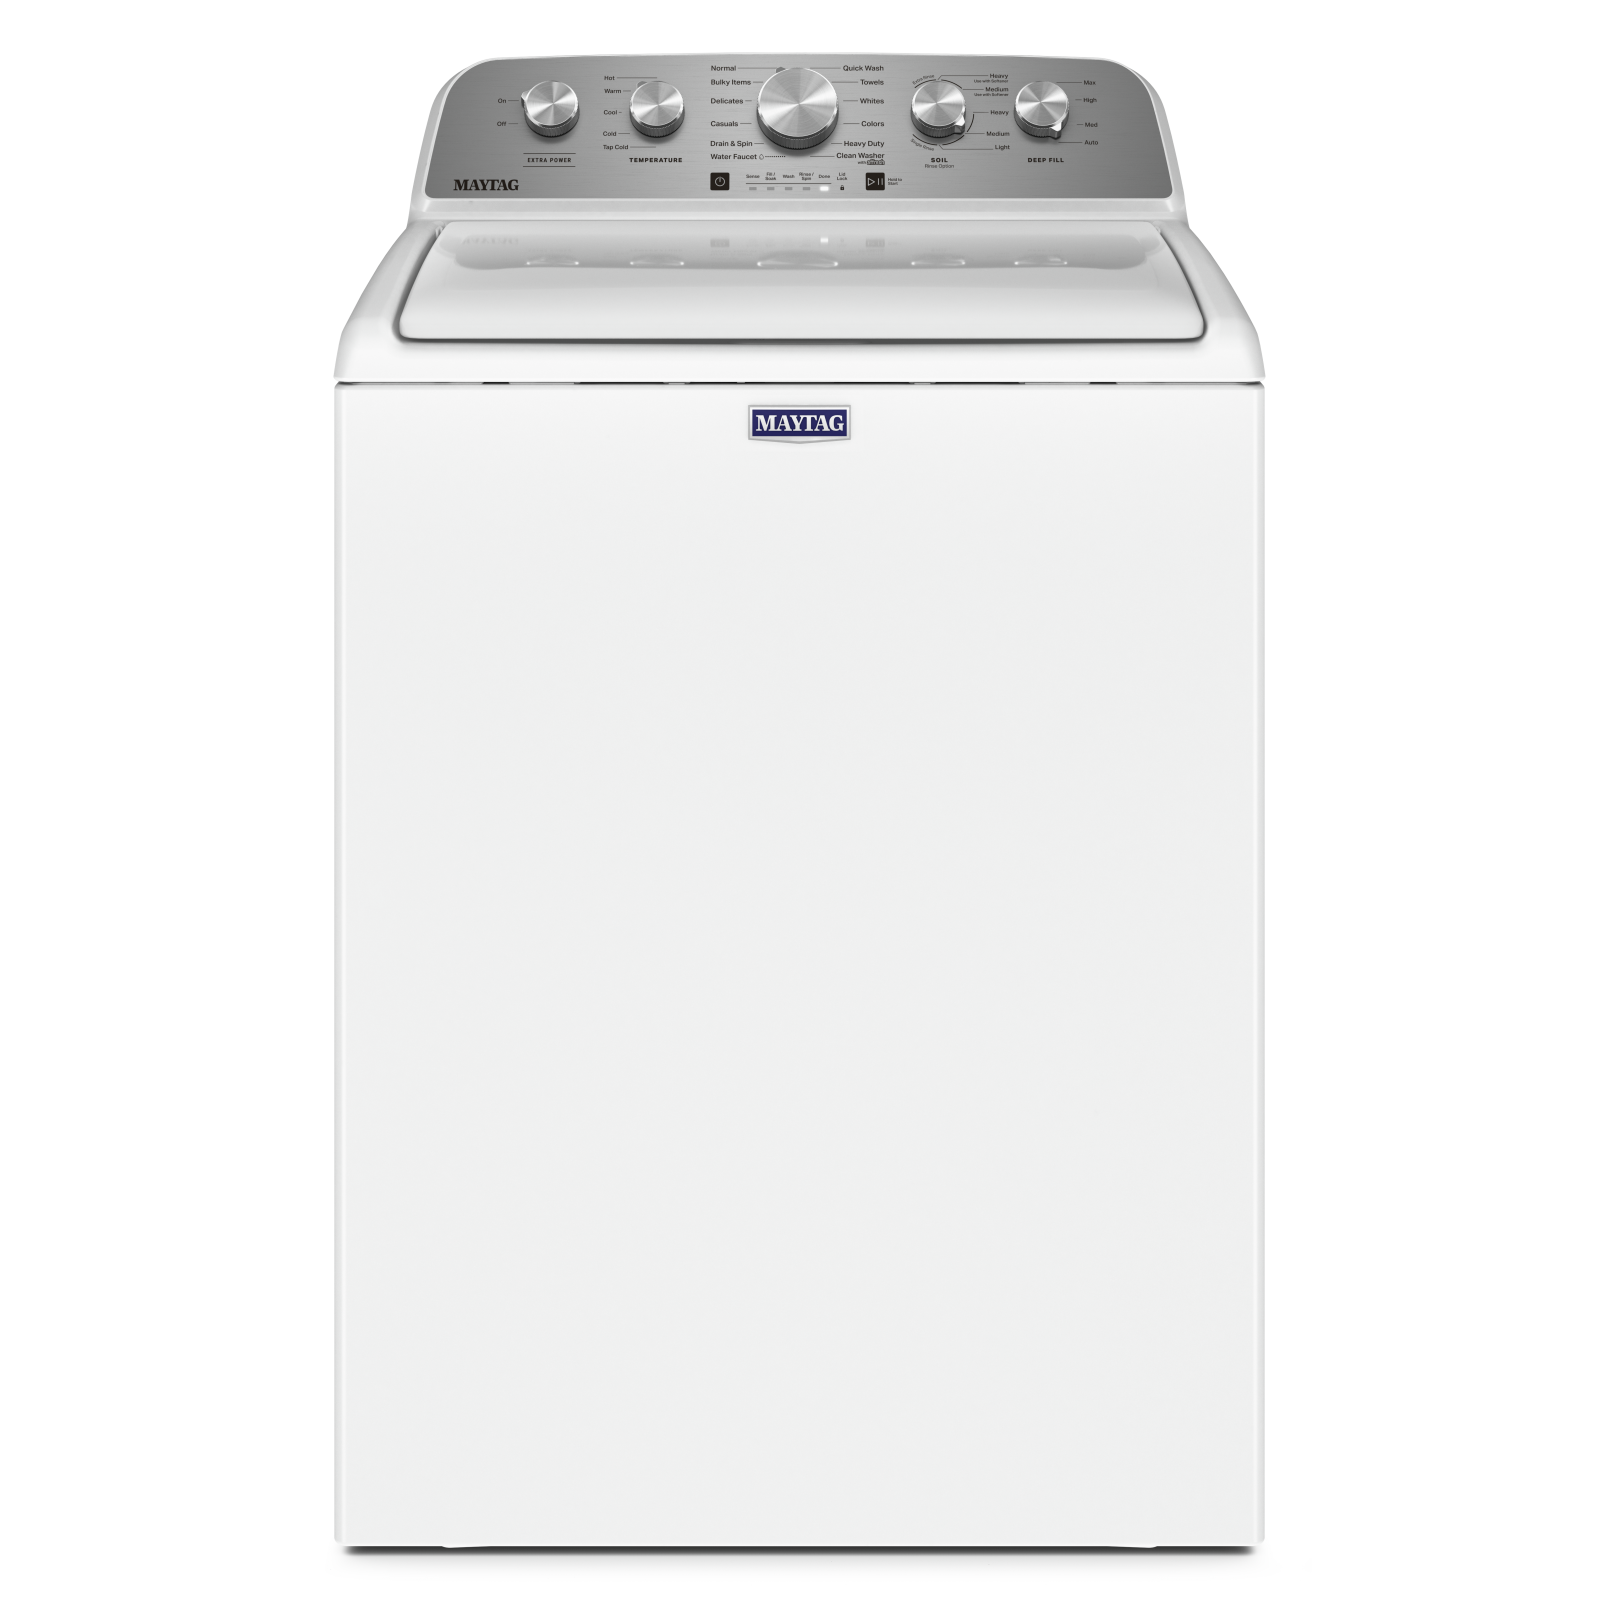 Maytag - 5.2 cu. Ft  Top Load Washer in White - MVW5035MW